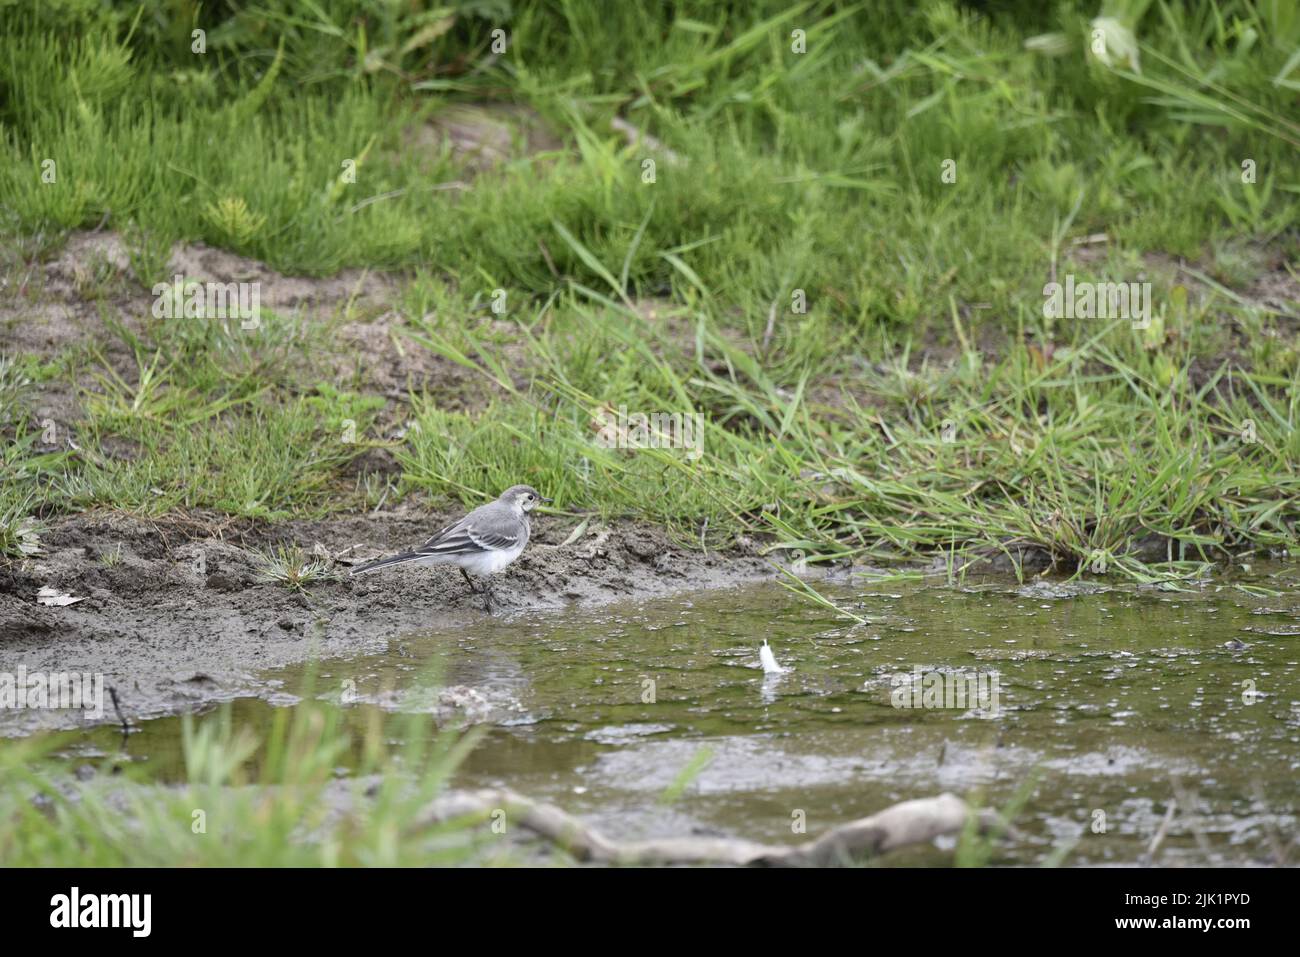 White Wagtail (Motacilla alba) in Right-Profile, Looking Towards Green Water in Foreground of Image, with a Grassy Bank Background in June in the UK Stock Photo